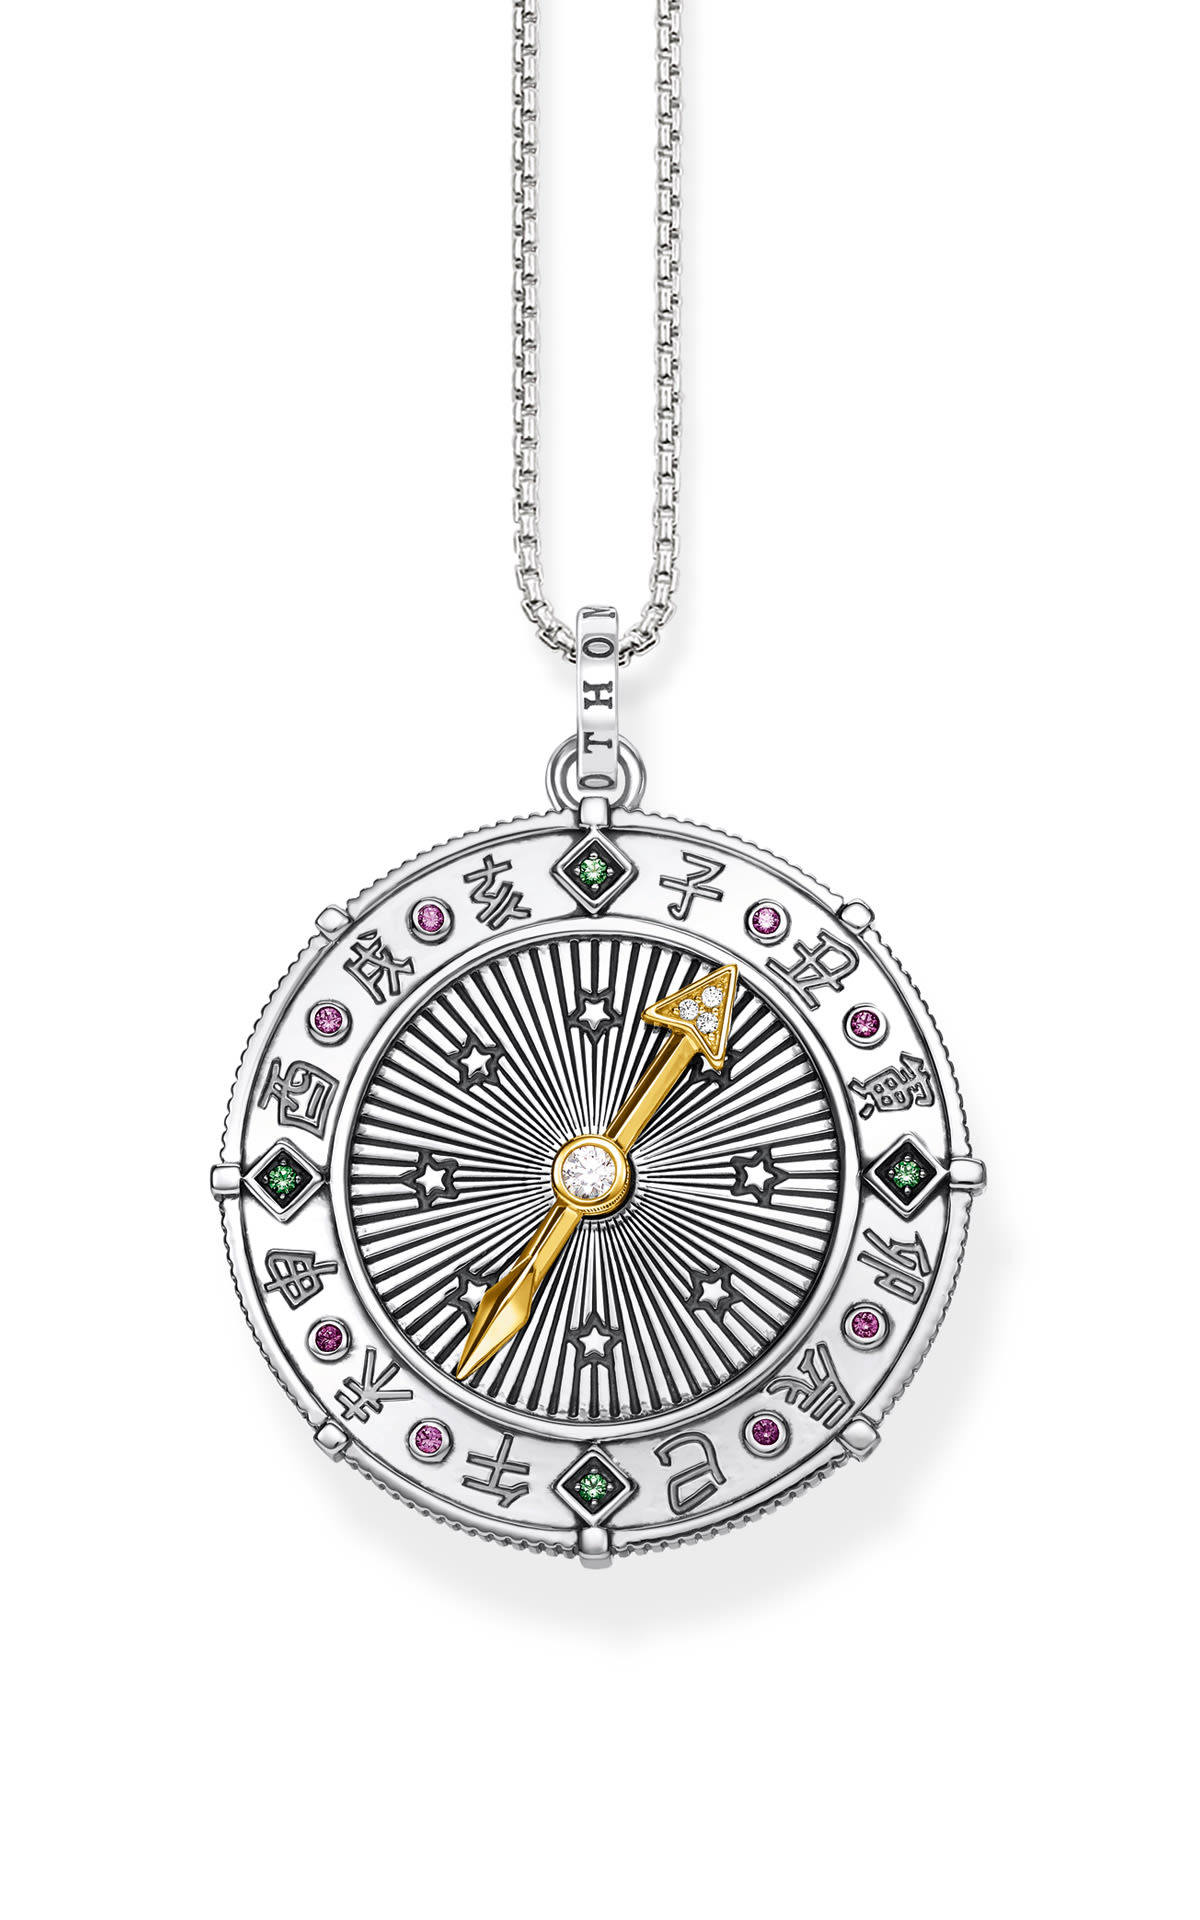 Silver donut-shaped pendant with compass detail and precious stones Thomas sabo